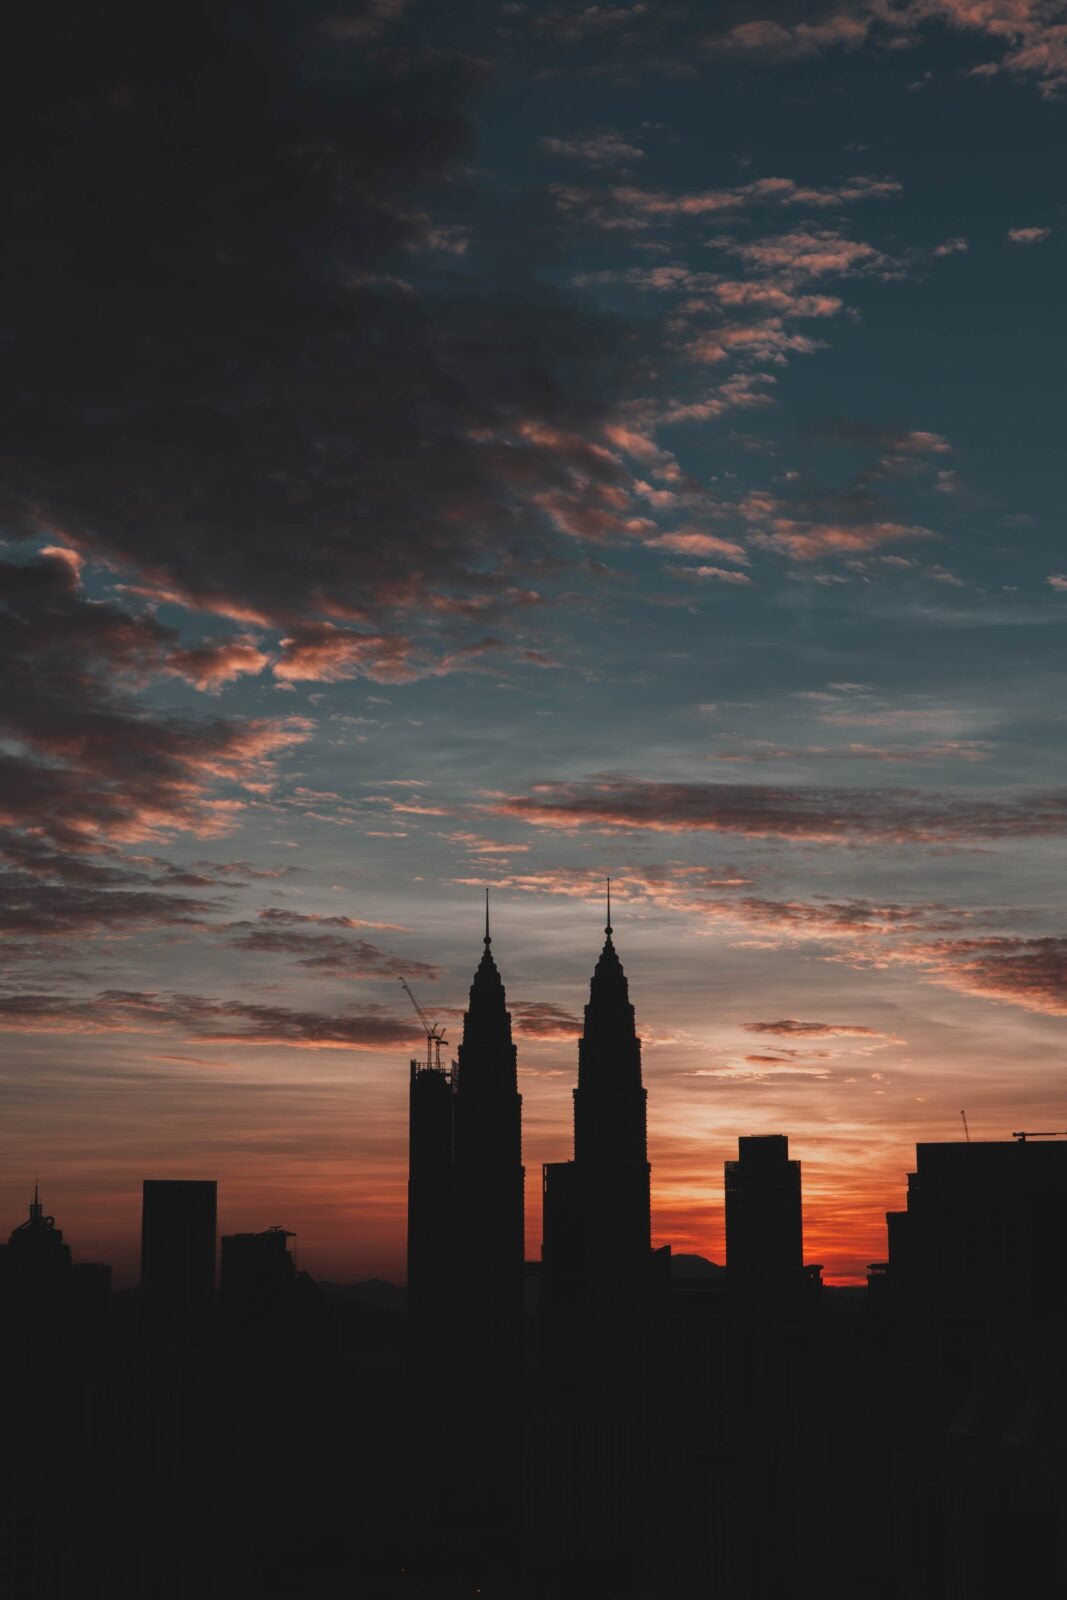 A sillhoutte of the Kuala Lumpur Twin Towers under the beautiful pink skies.